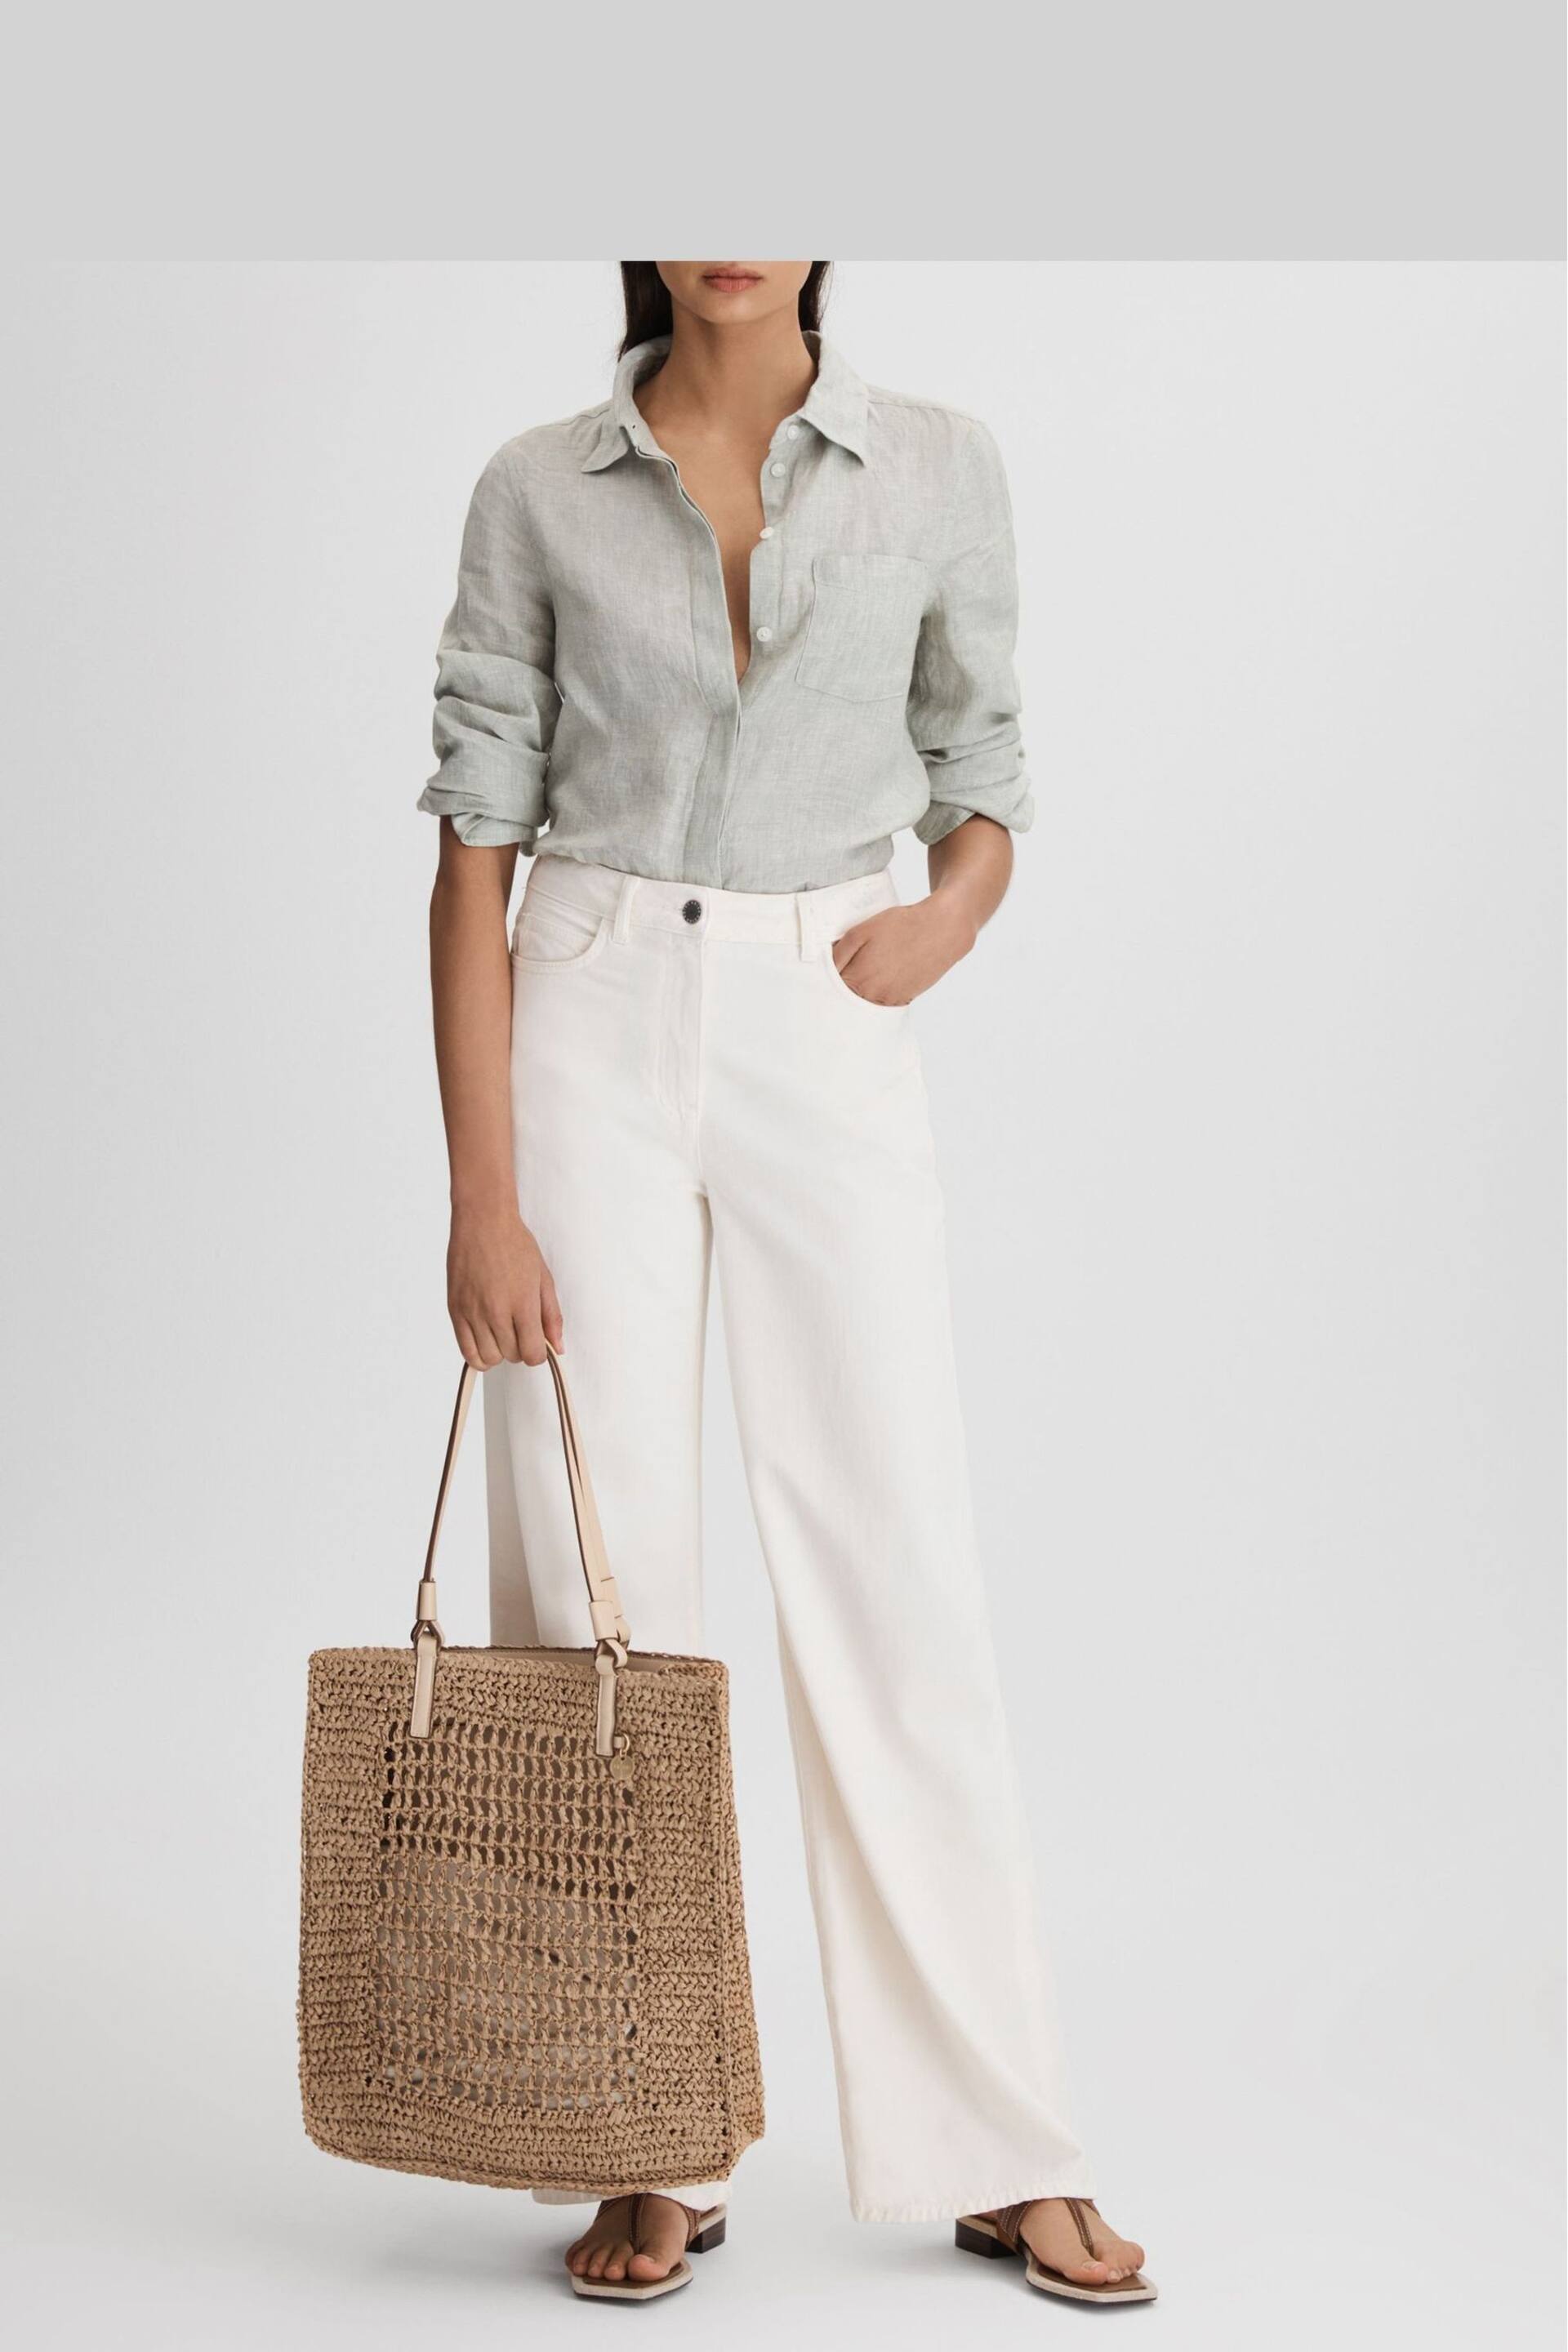 Reiss Natural Maria Woven Tote Bag - Image 2 of 5